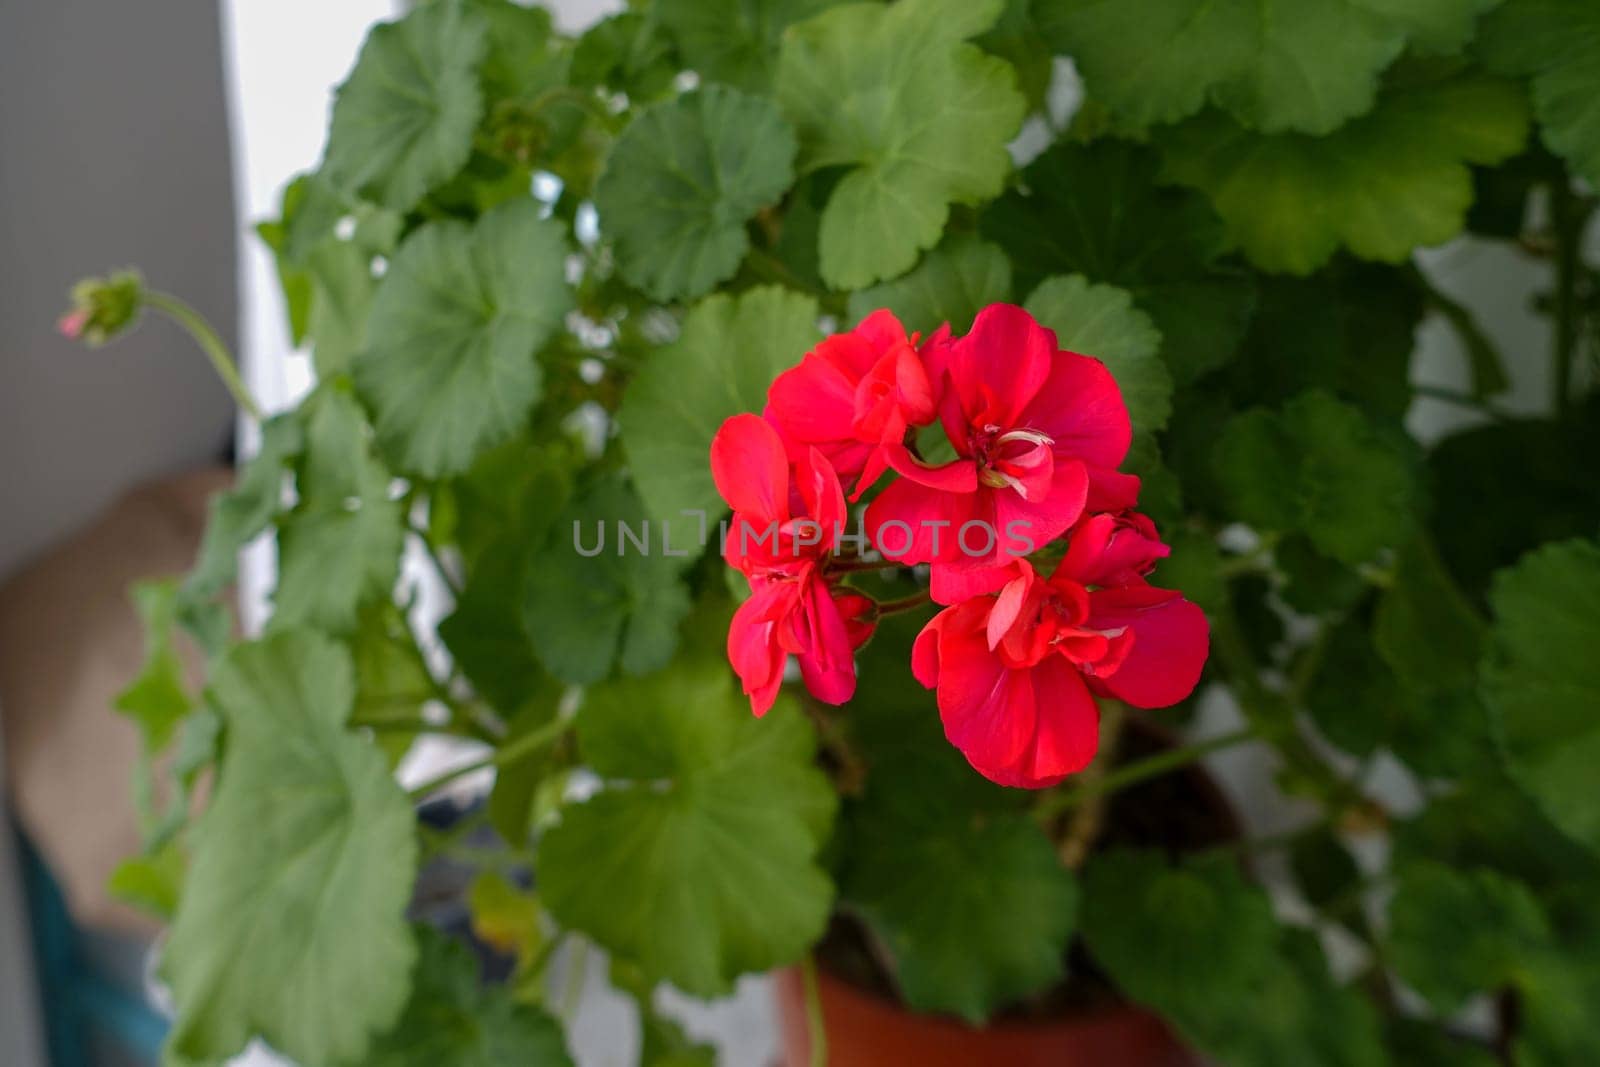 Geranium flower, in the window of a house, interest in flowers, women growing flowers at home, by nhatipoglu